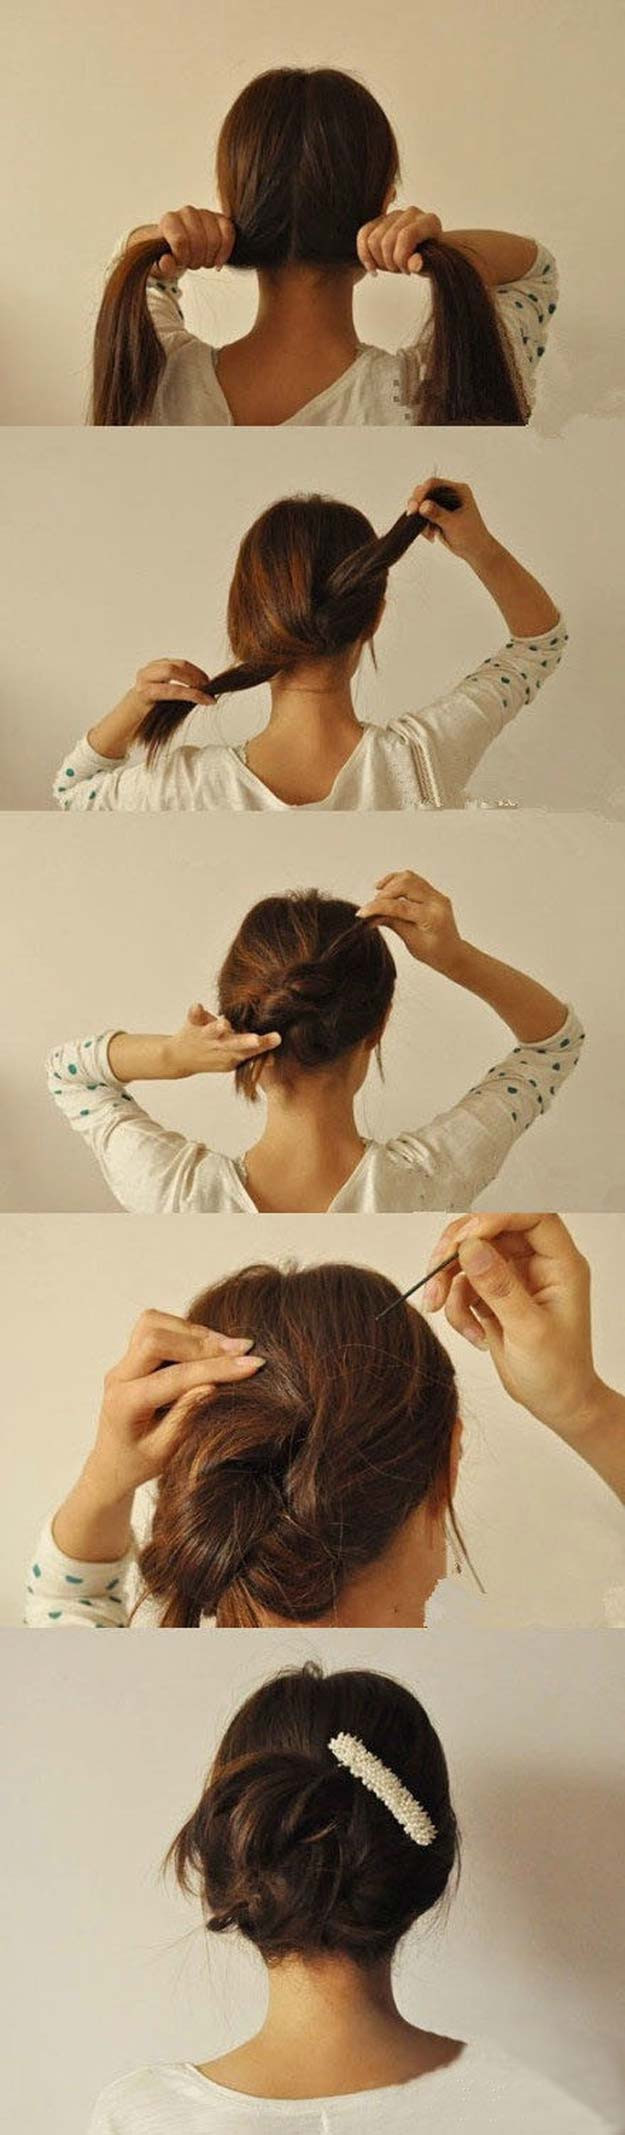 DIY Updo Hairstyles
 36 Best Hairstyles for Long Hair DIY Projects for Teens